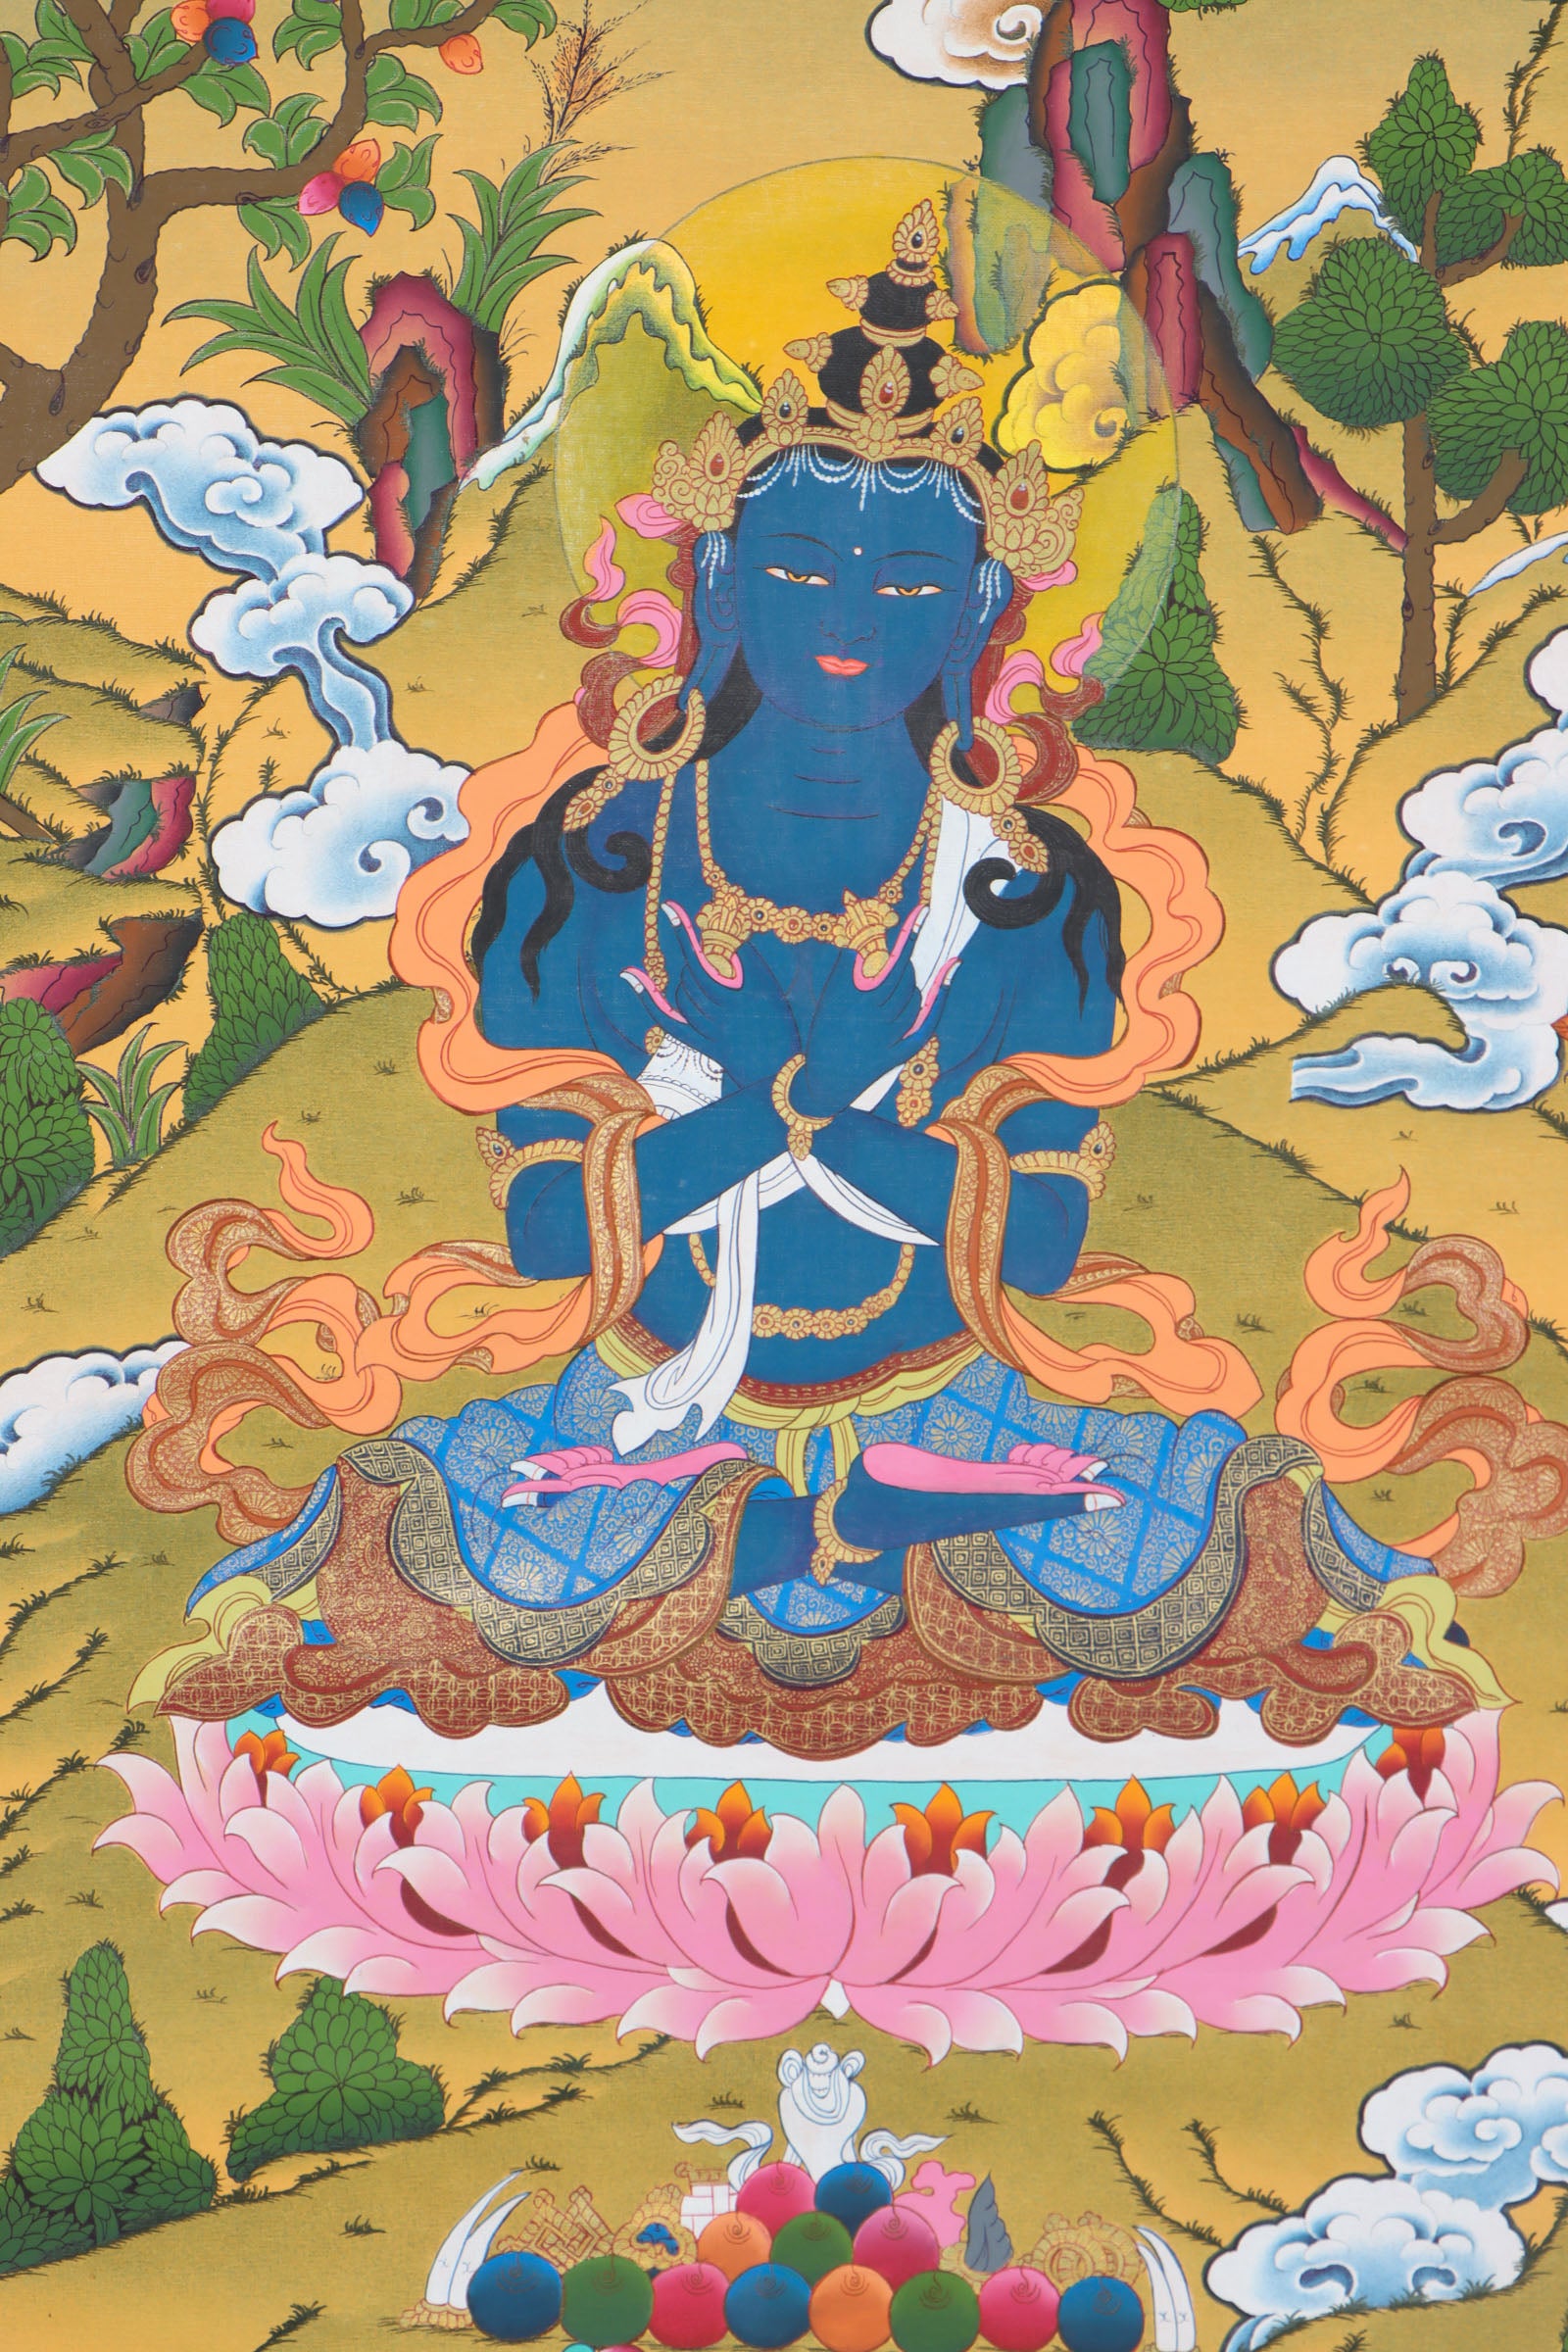 Vajradhara Thangka for wisdom in the path to enlightenment.